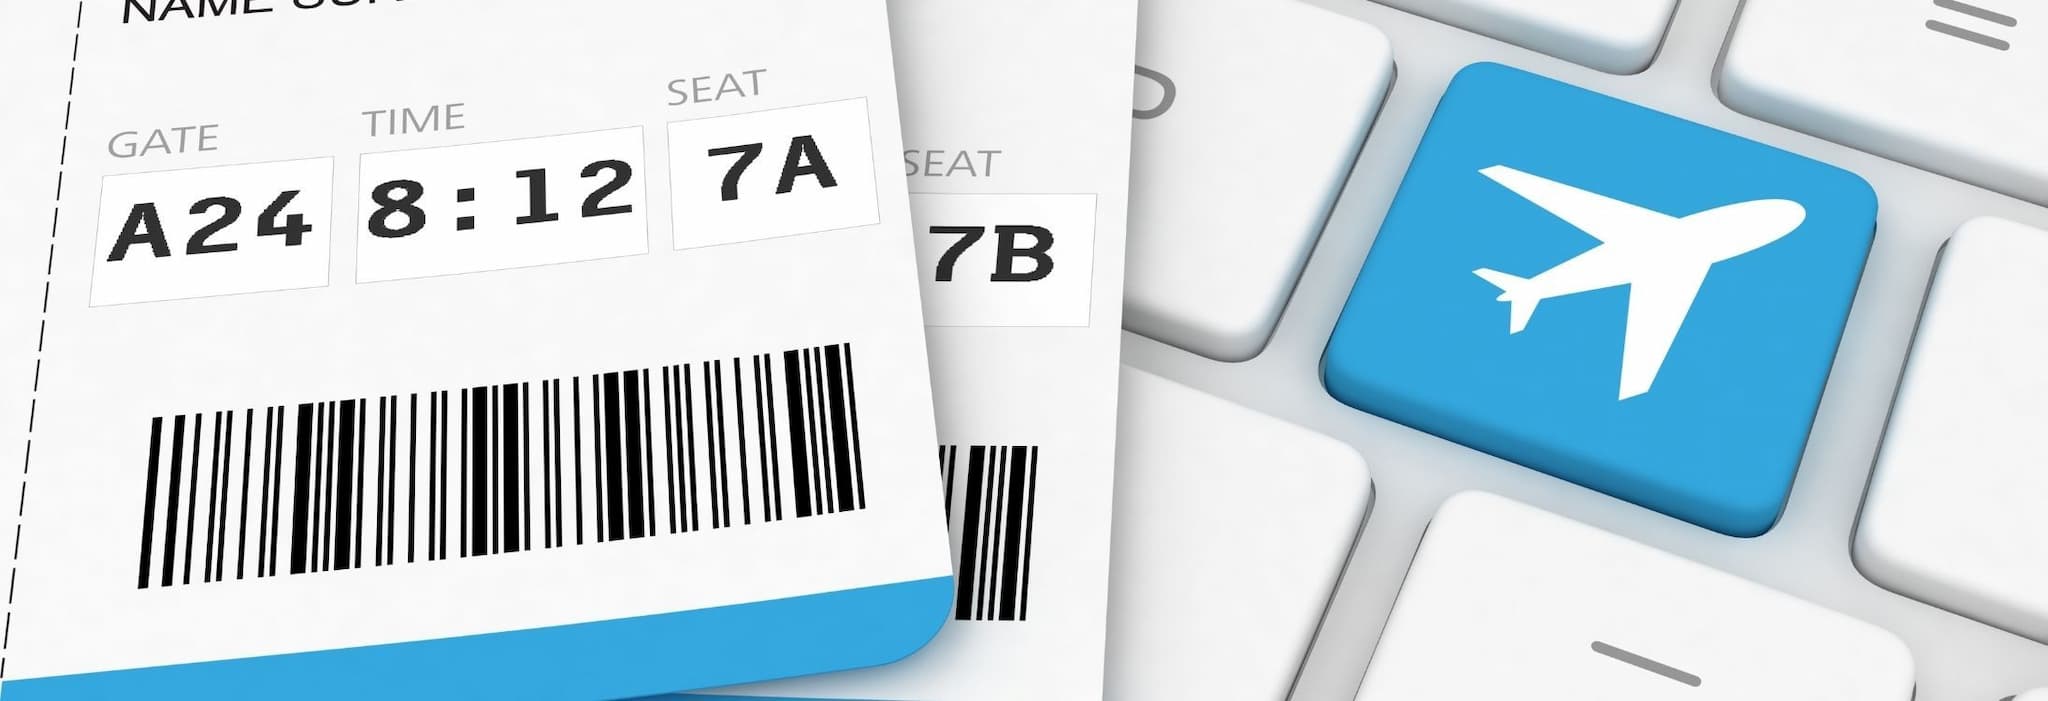 15 Hacks To Make a Smart Decision While Booking Your Flight Tickets